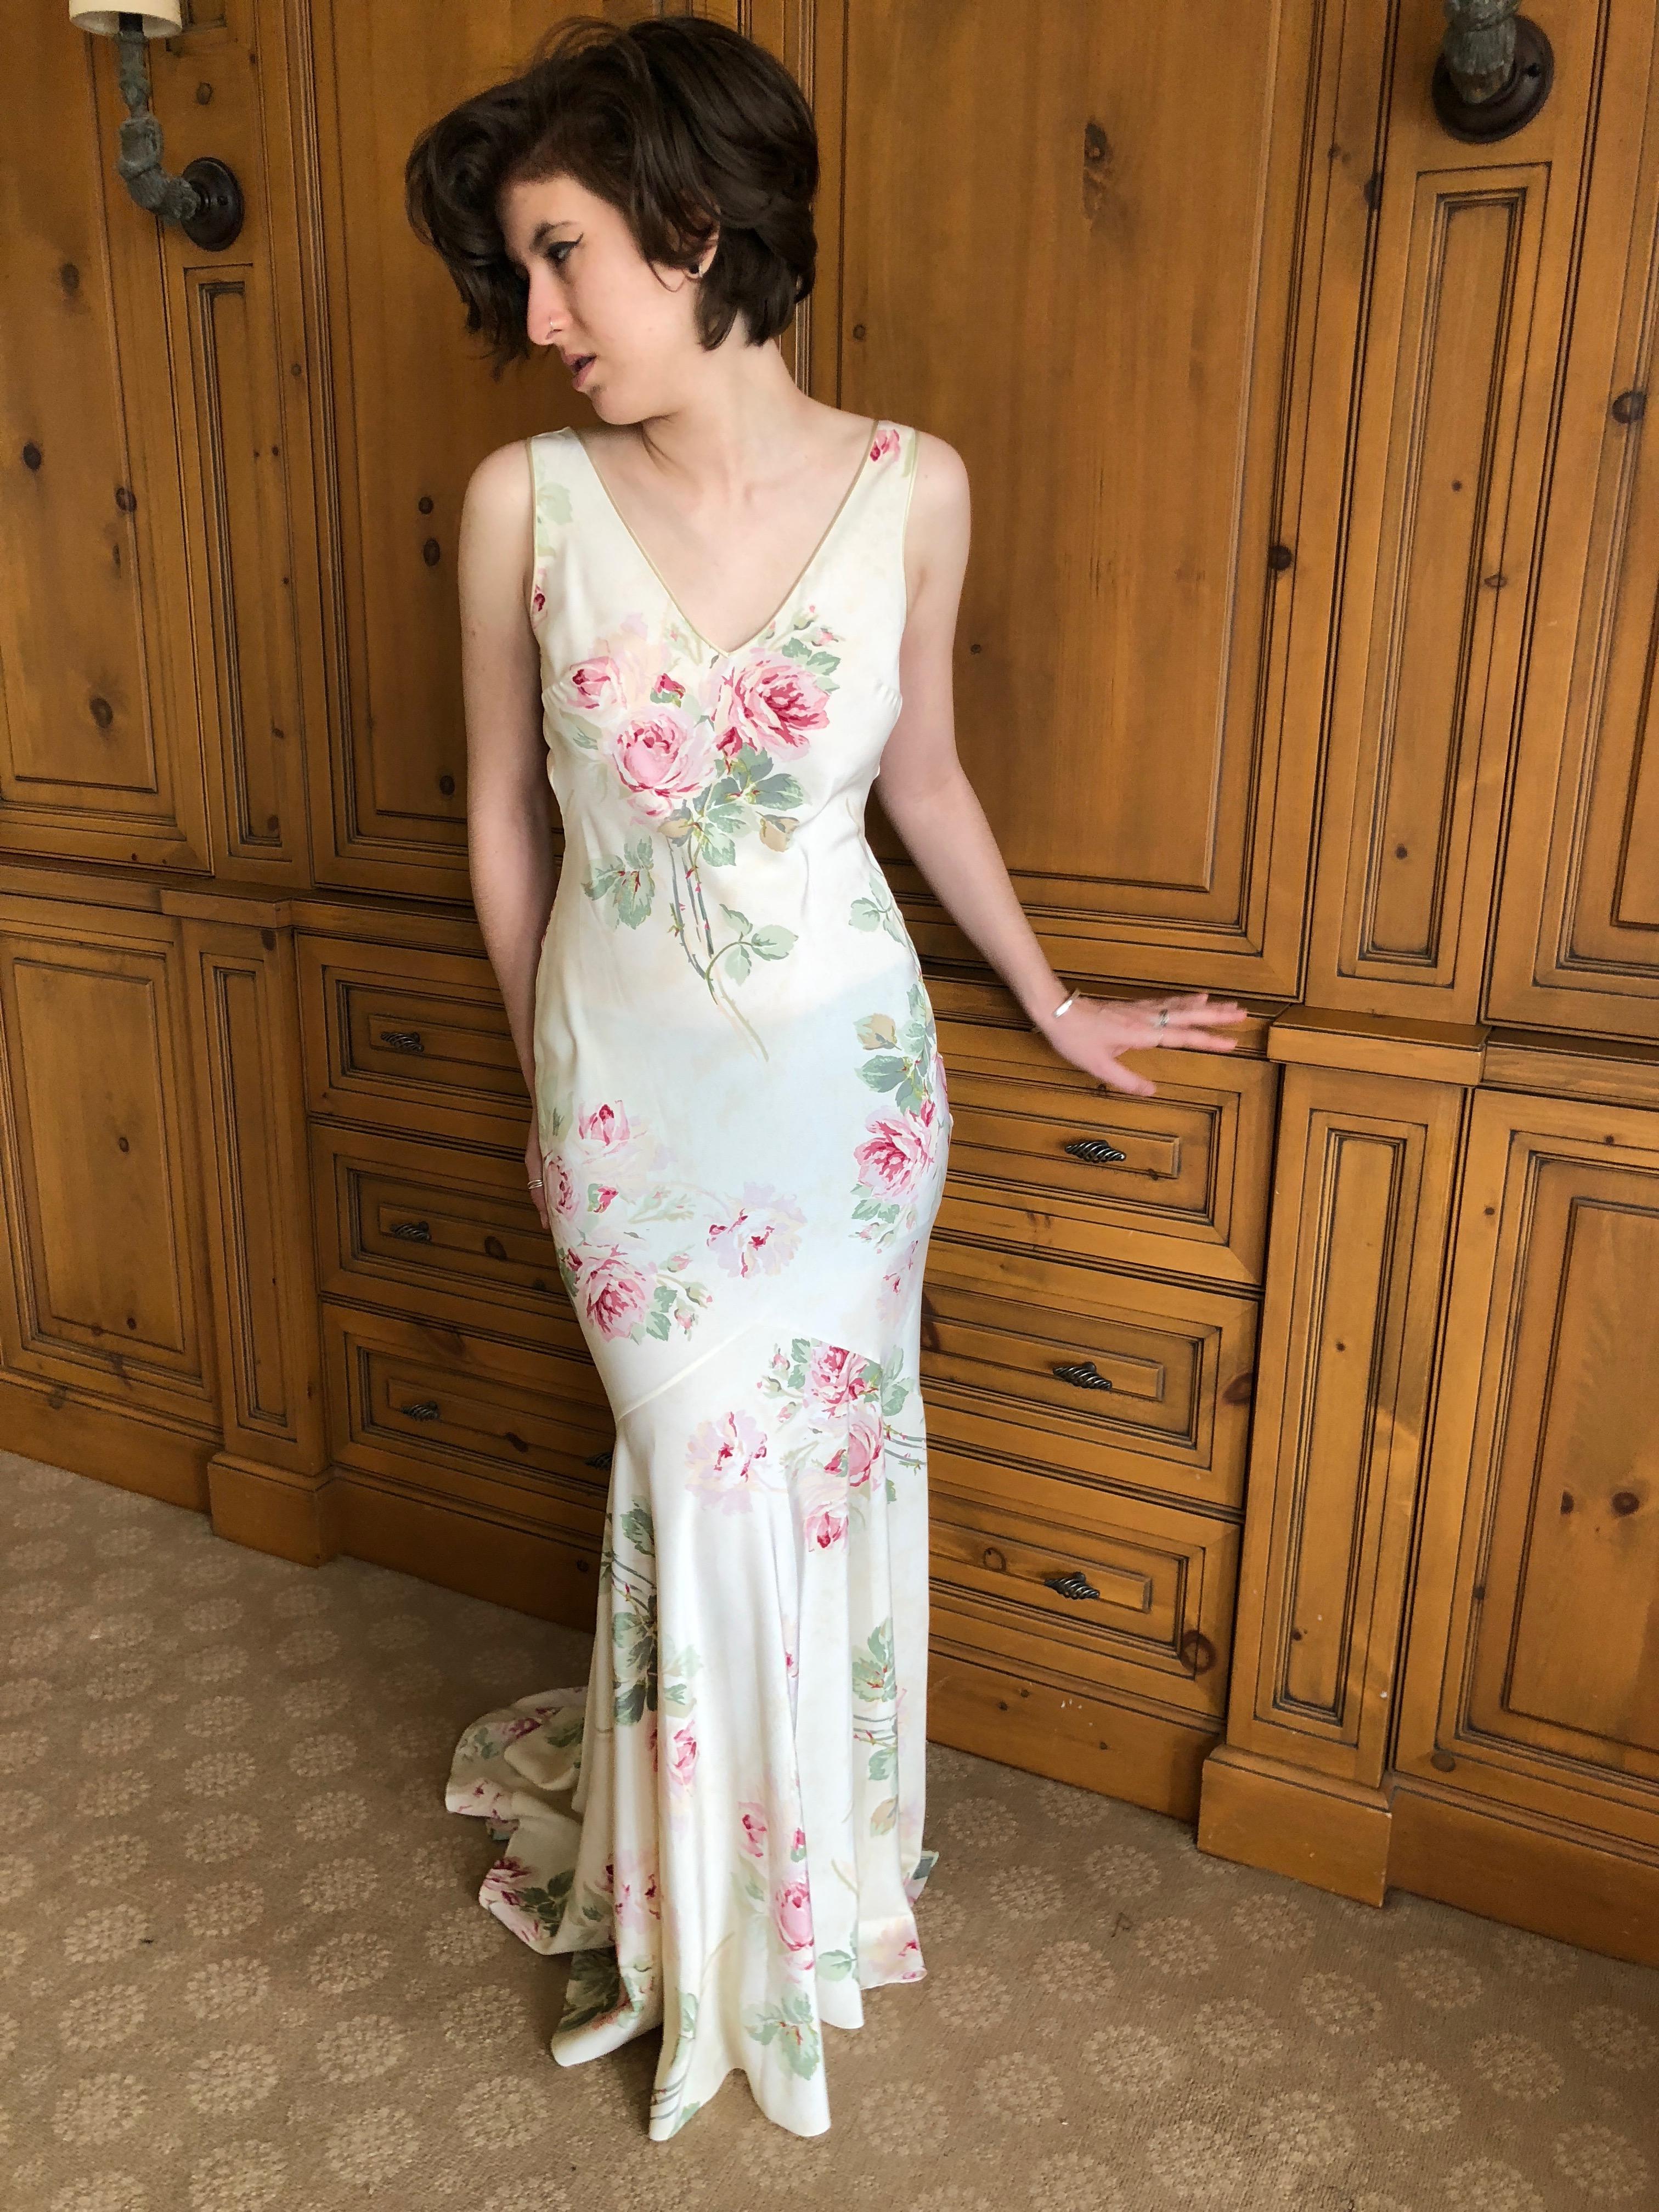 John Galliano 1990's Bias Cut Floral Dress with Draped Back and Train.
This would make an exquisite wedding dress.
So much prettier in person.
Appx Size 38-40, there is no fabric or sizing tag.
Bust 40